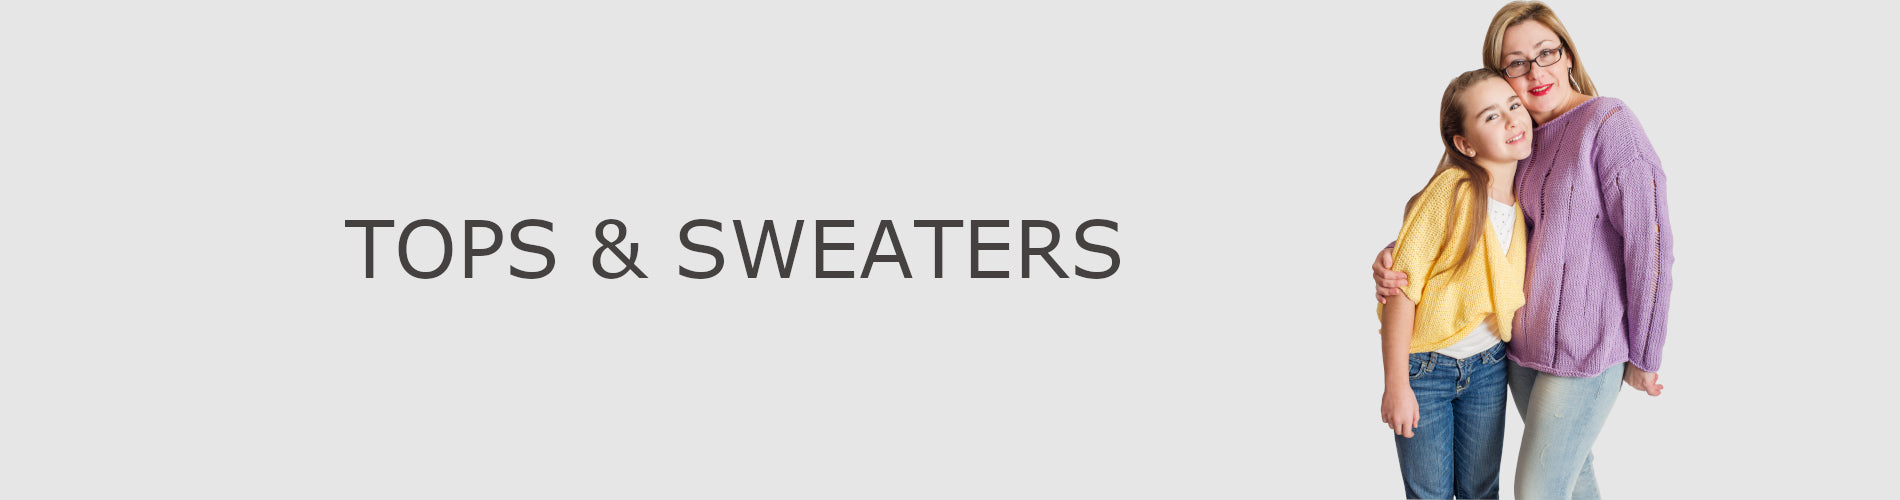 Tops & Sweaters